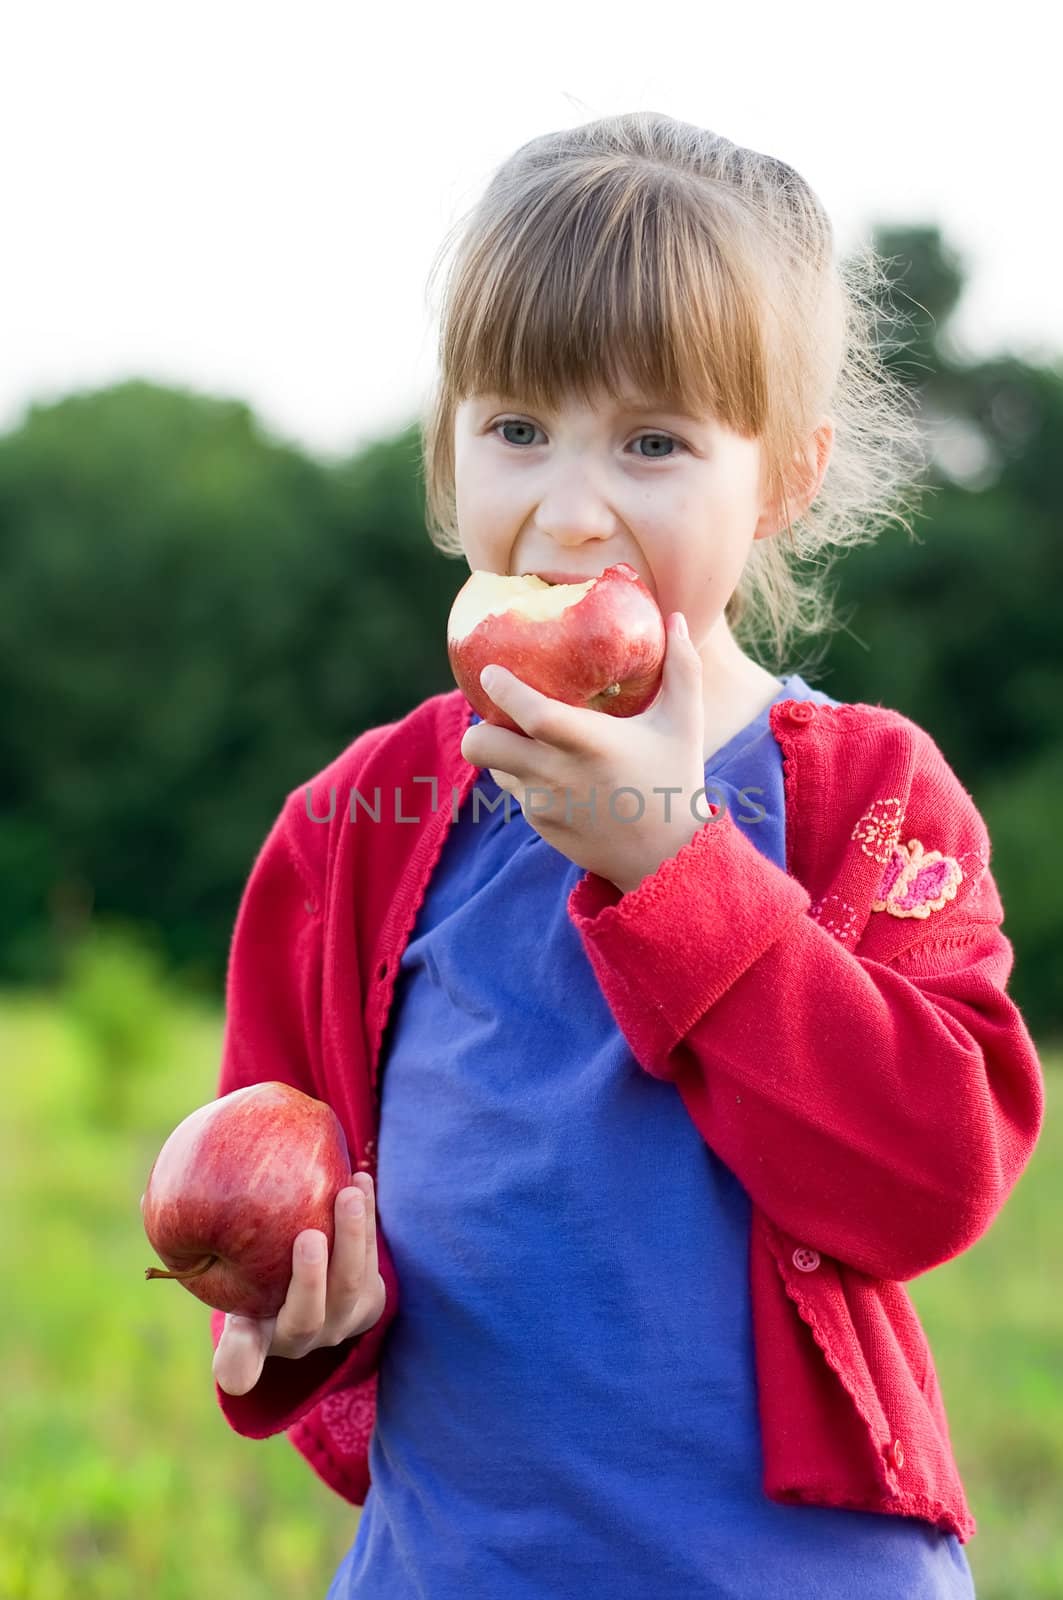 little girl eating apples in a meadow. healthy nutrition concept.